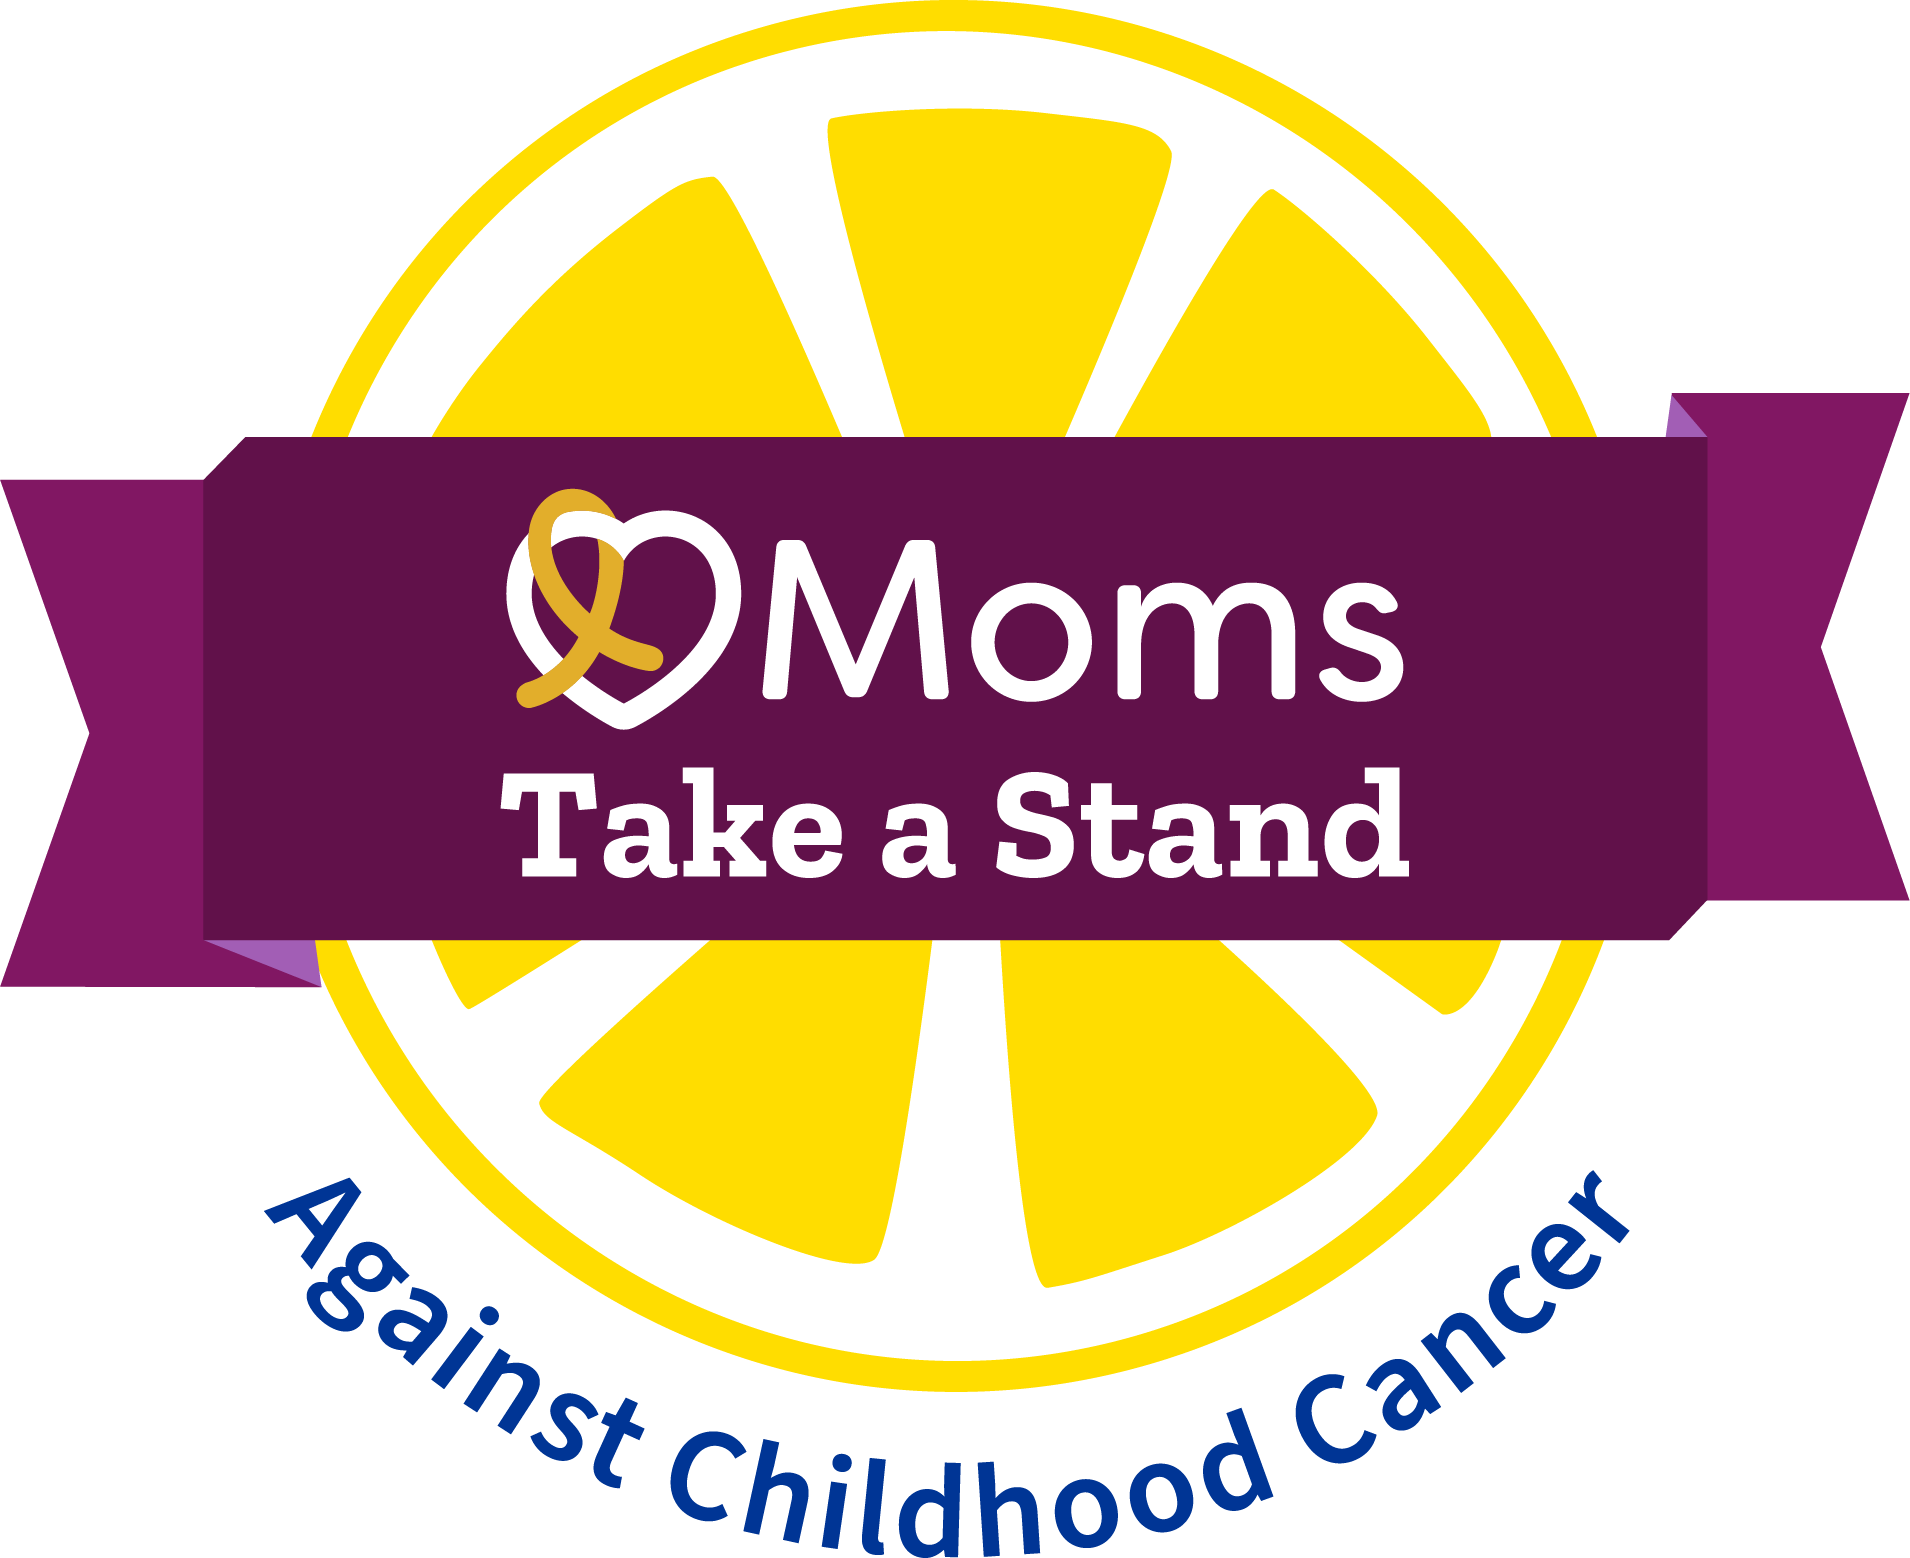 Moms Take a Stand